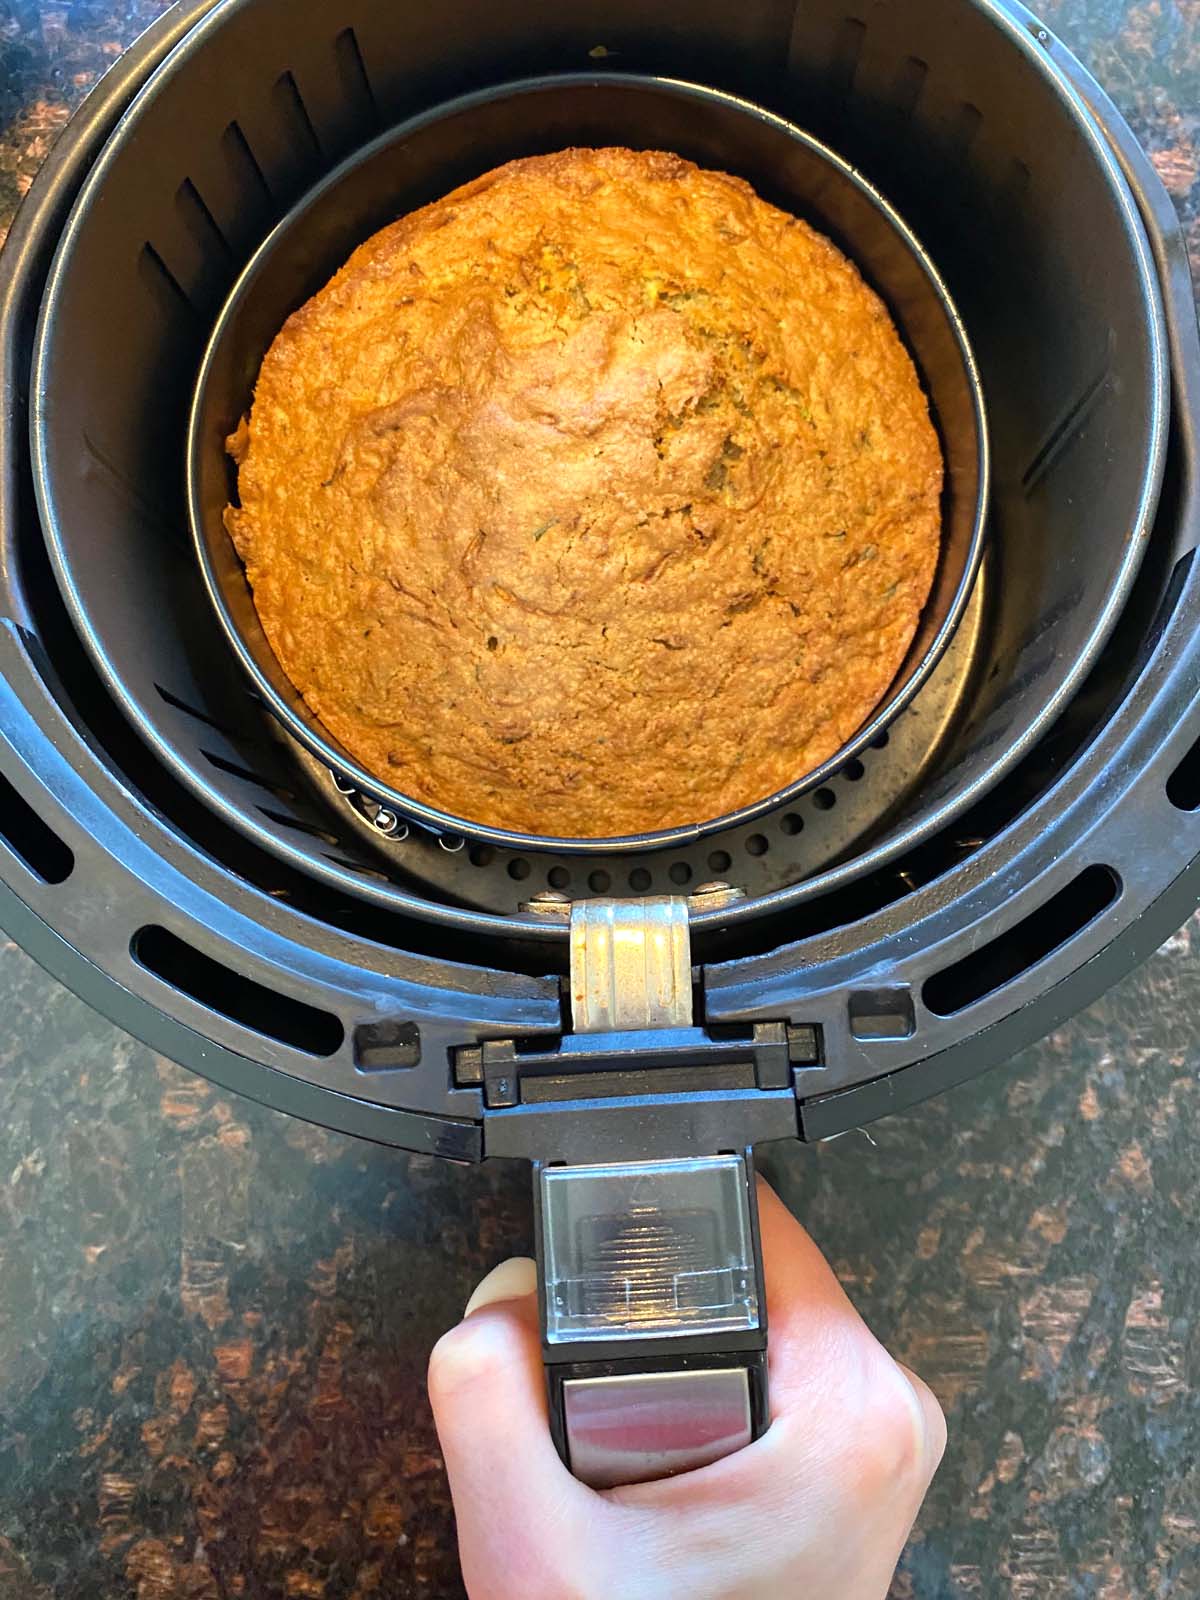 A freshly baked air fryer zucchini bread in the air fryer.